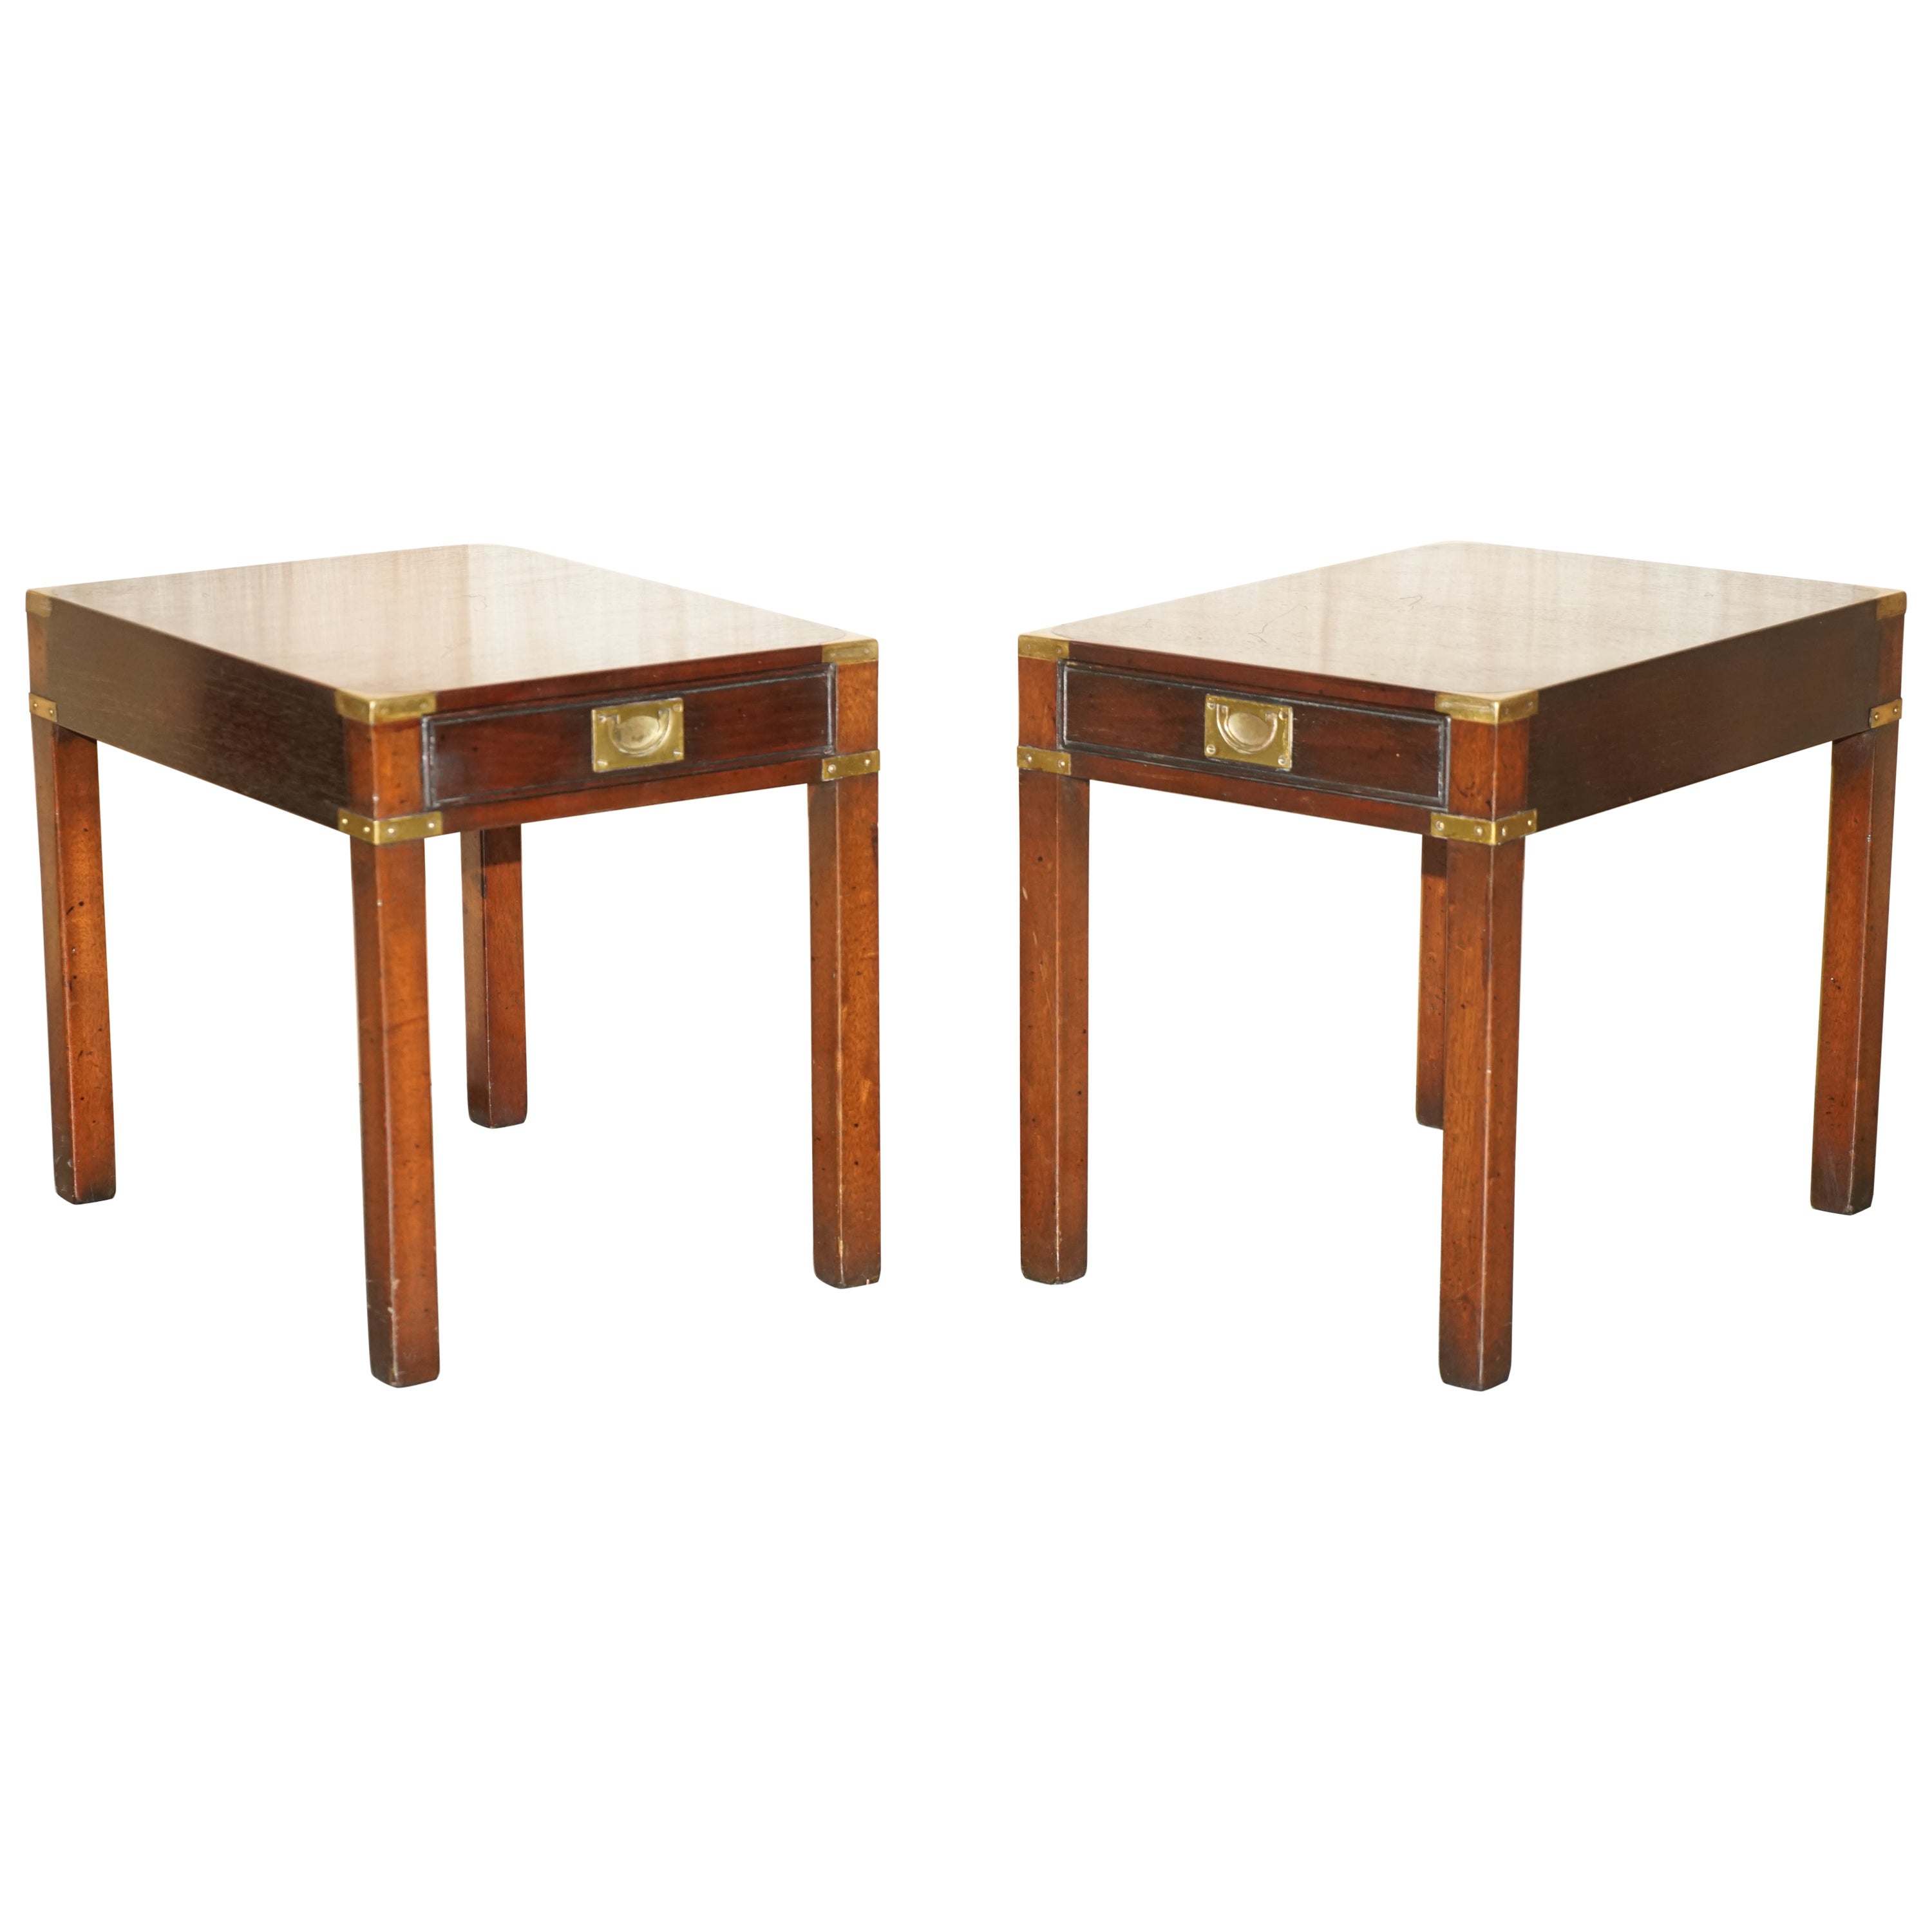 Pair of Restored Harrods Kennedy Hardwood Military Campaign Single Drawer Tables